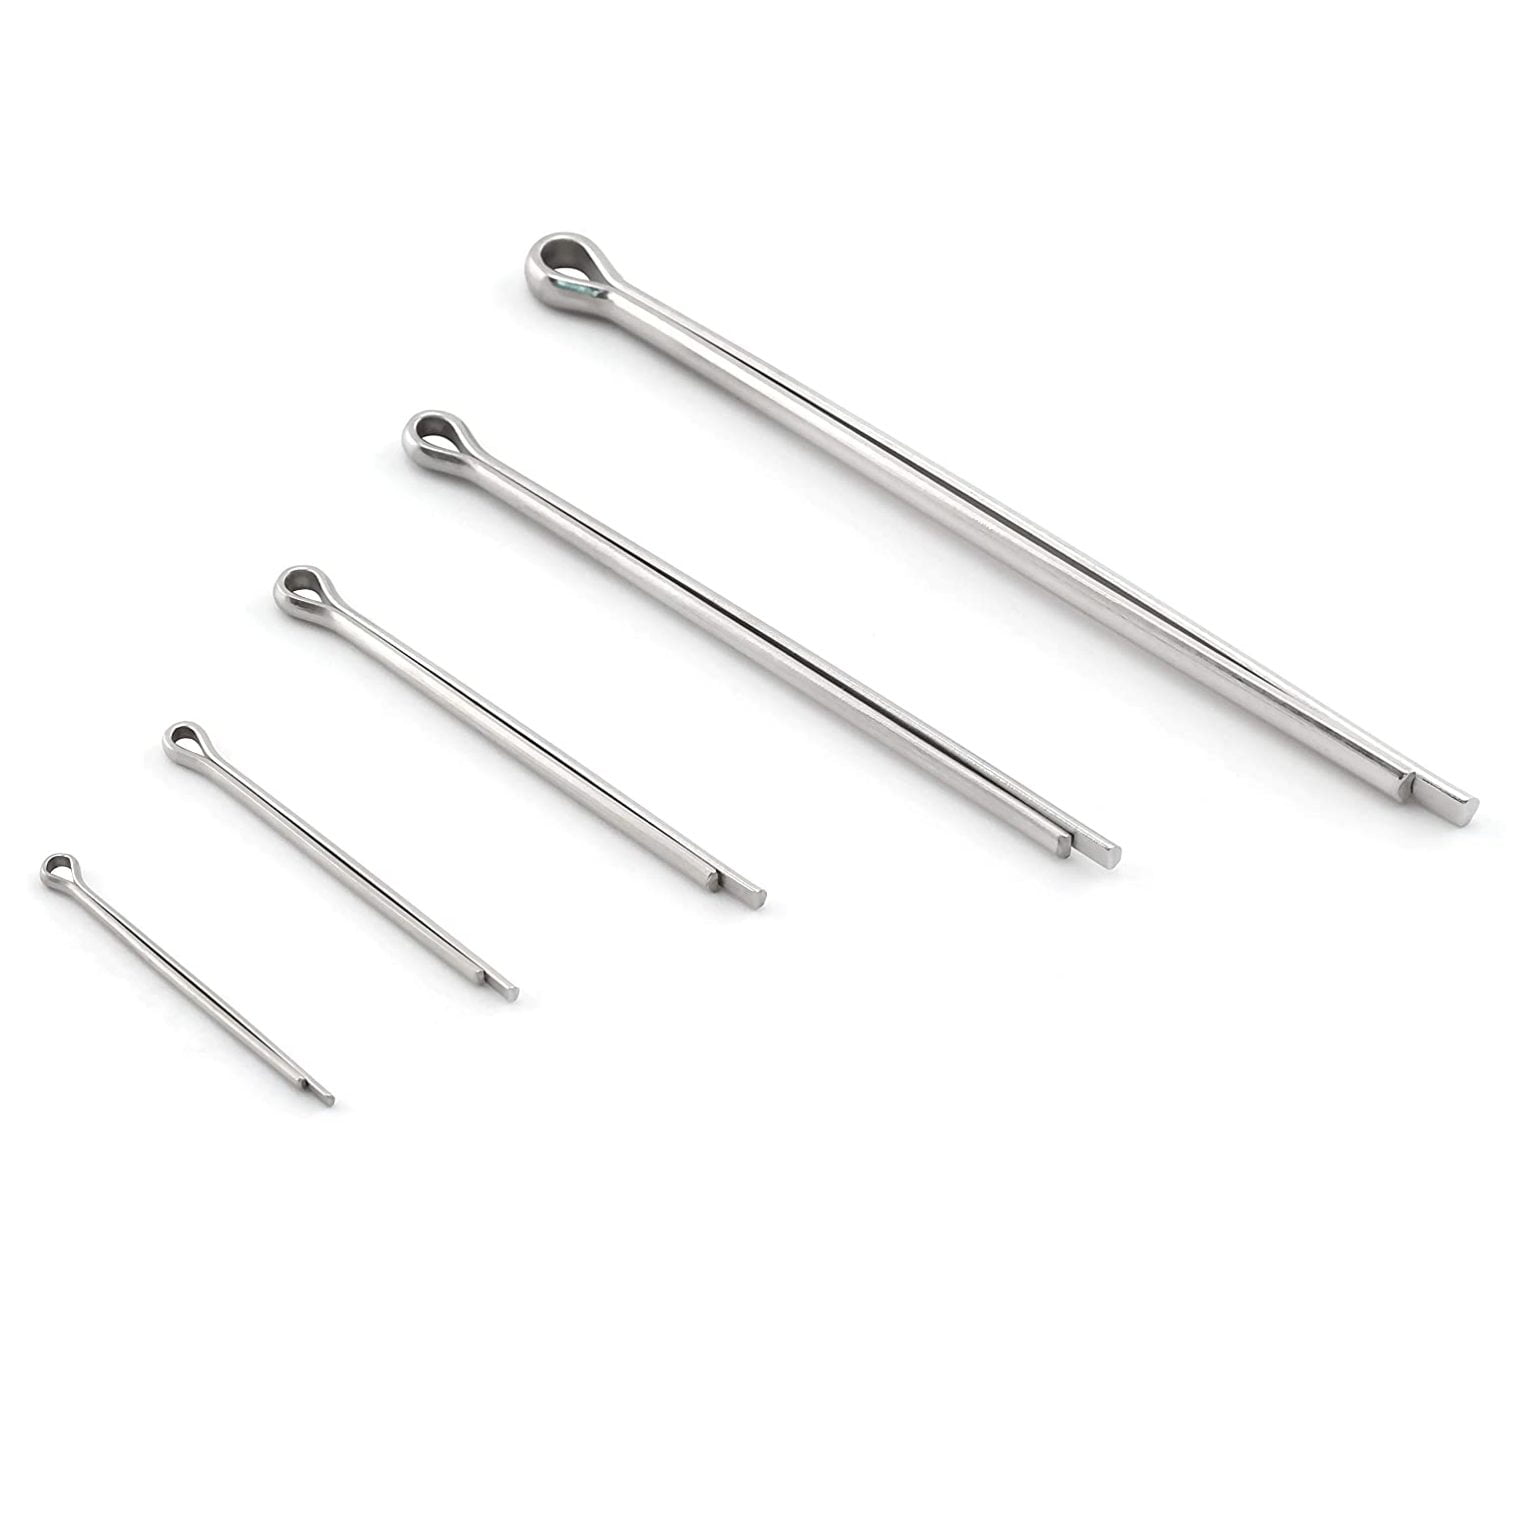 Details about   Rustark 300 Pcs Cotter Pin Assortment Kit With 6 Sizes Zinc Plated Steel Hitch 